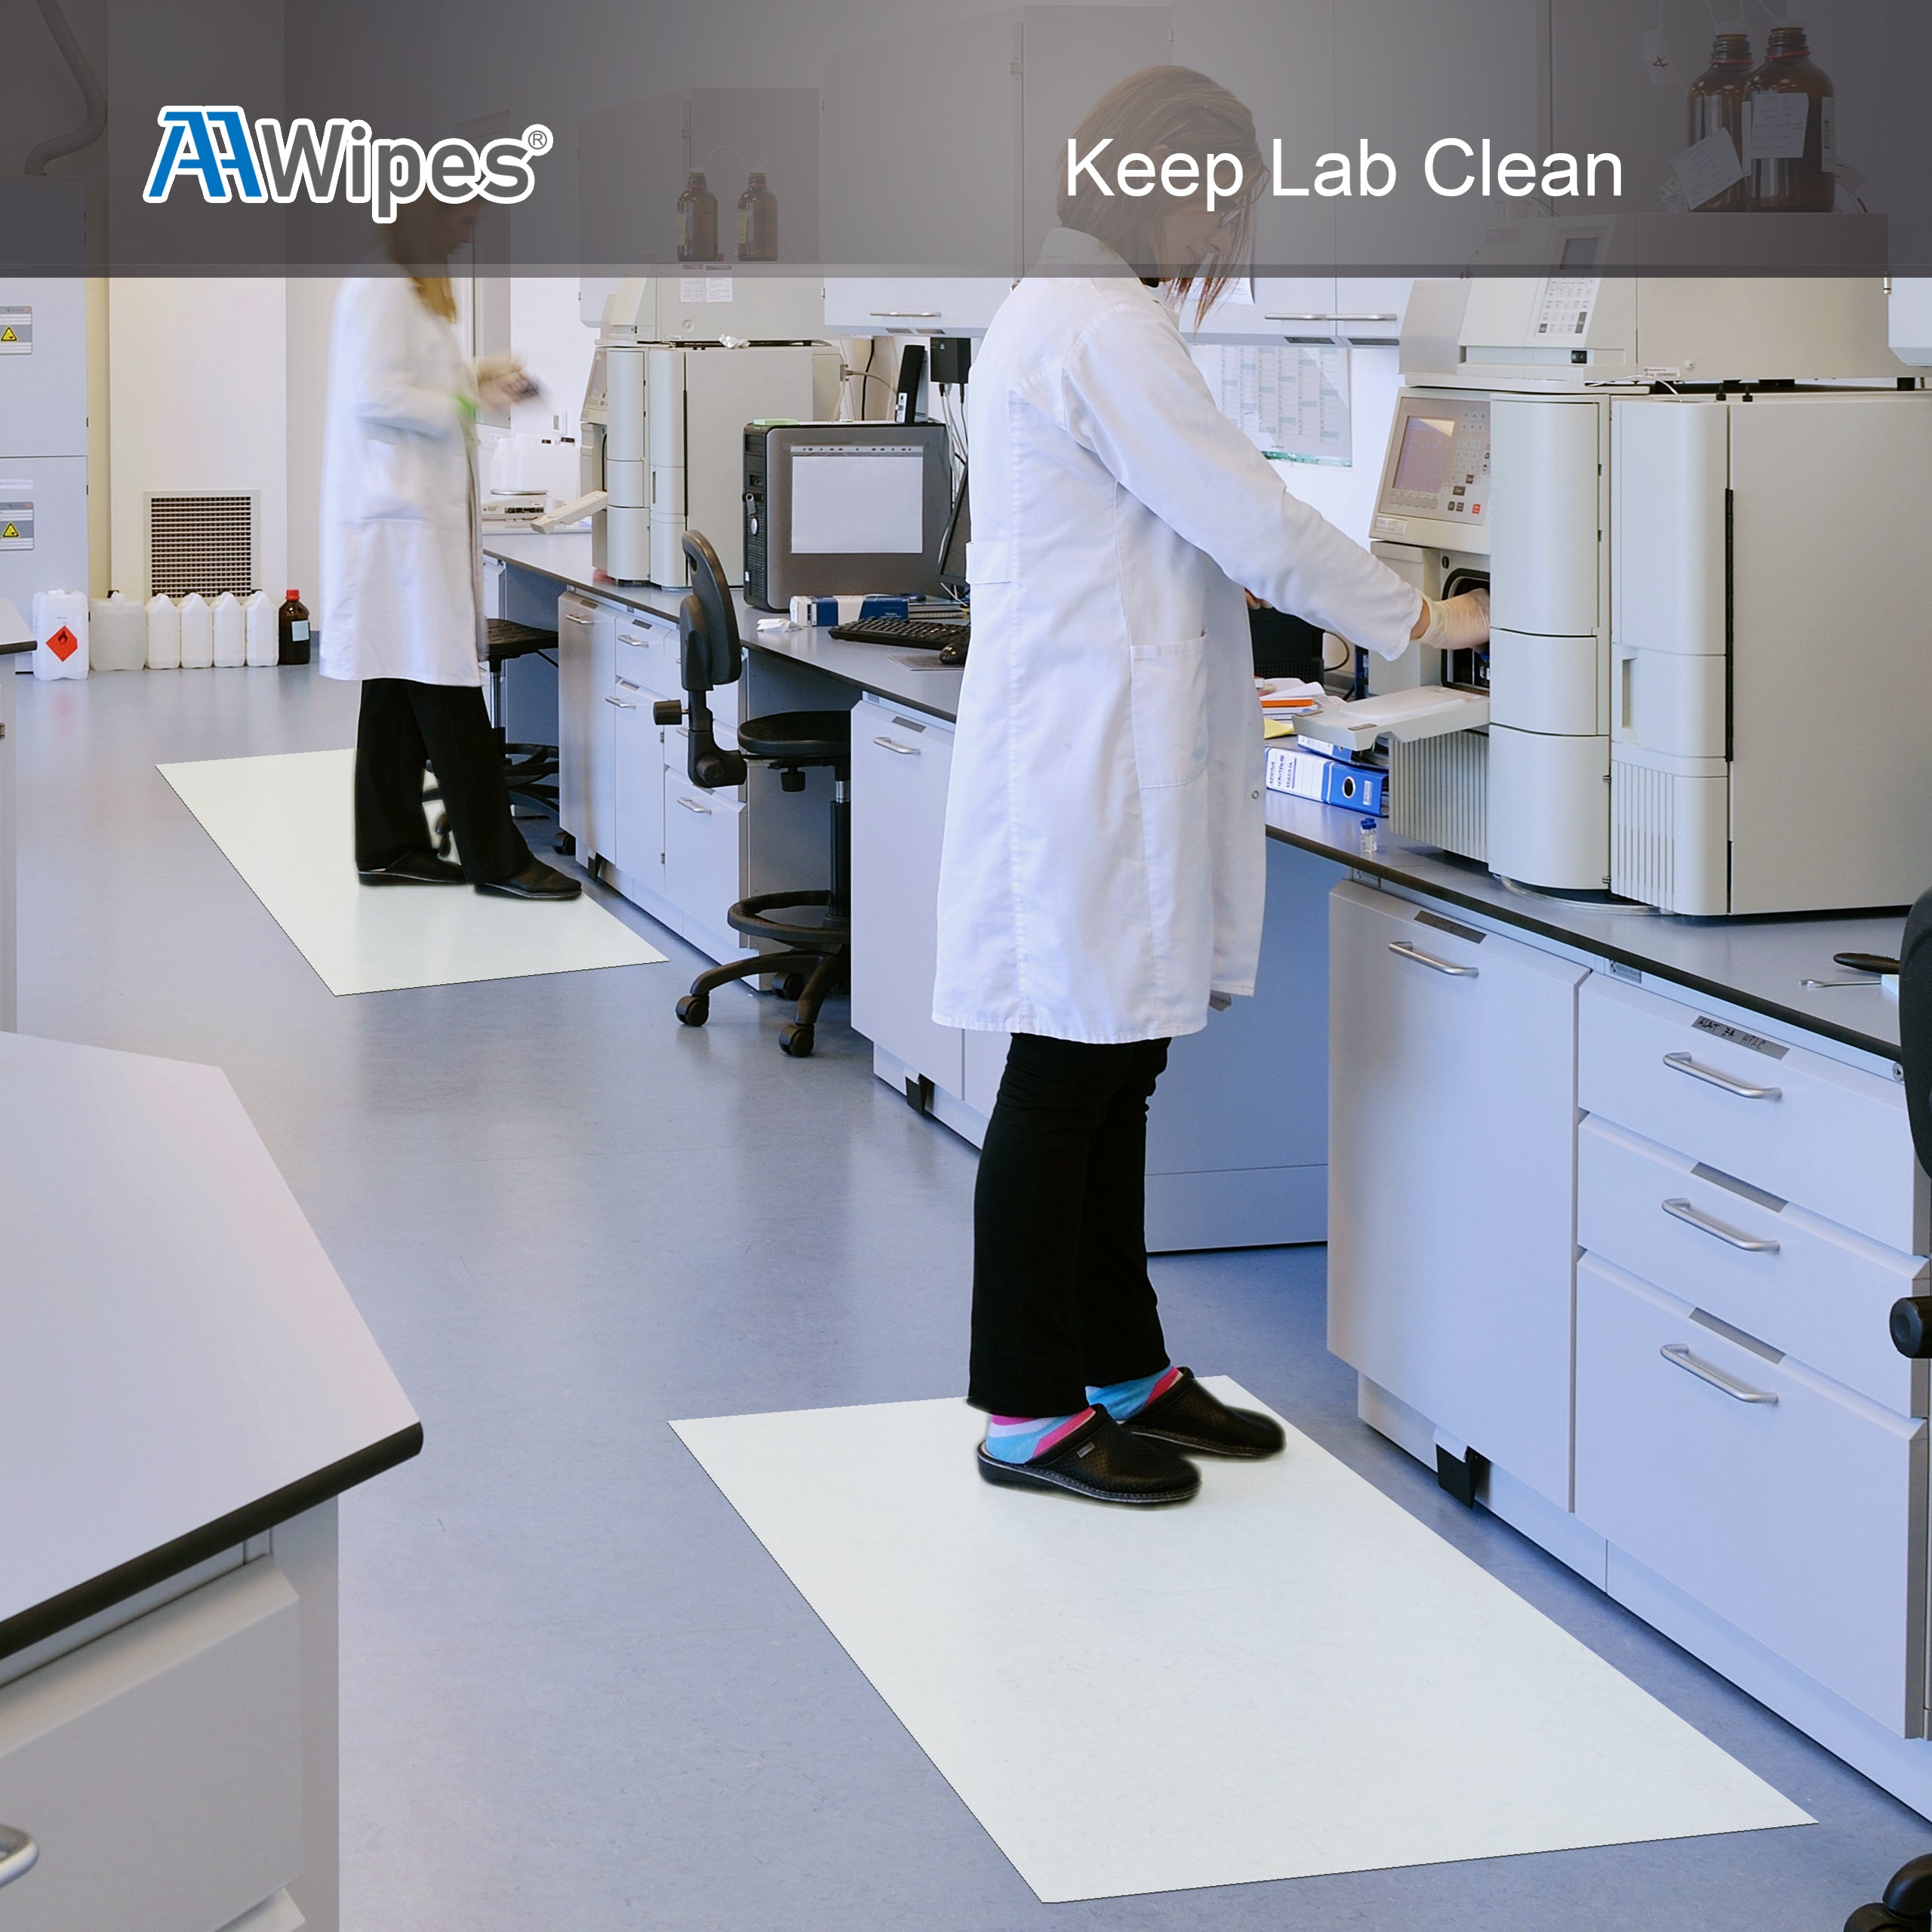 Cleanroom Sticky Floor Mats 18"X24" White for Microelectronics, Aerospace, Pharmaceuticals,Food Processing, Hospital, Lab, Health Care, Manufacturing, Semiconductor (6,000 Sheets/200 Mats/20 Boxs/Case) (No. IPSM-1824-300-W)